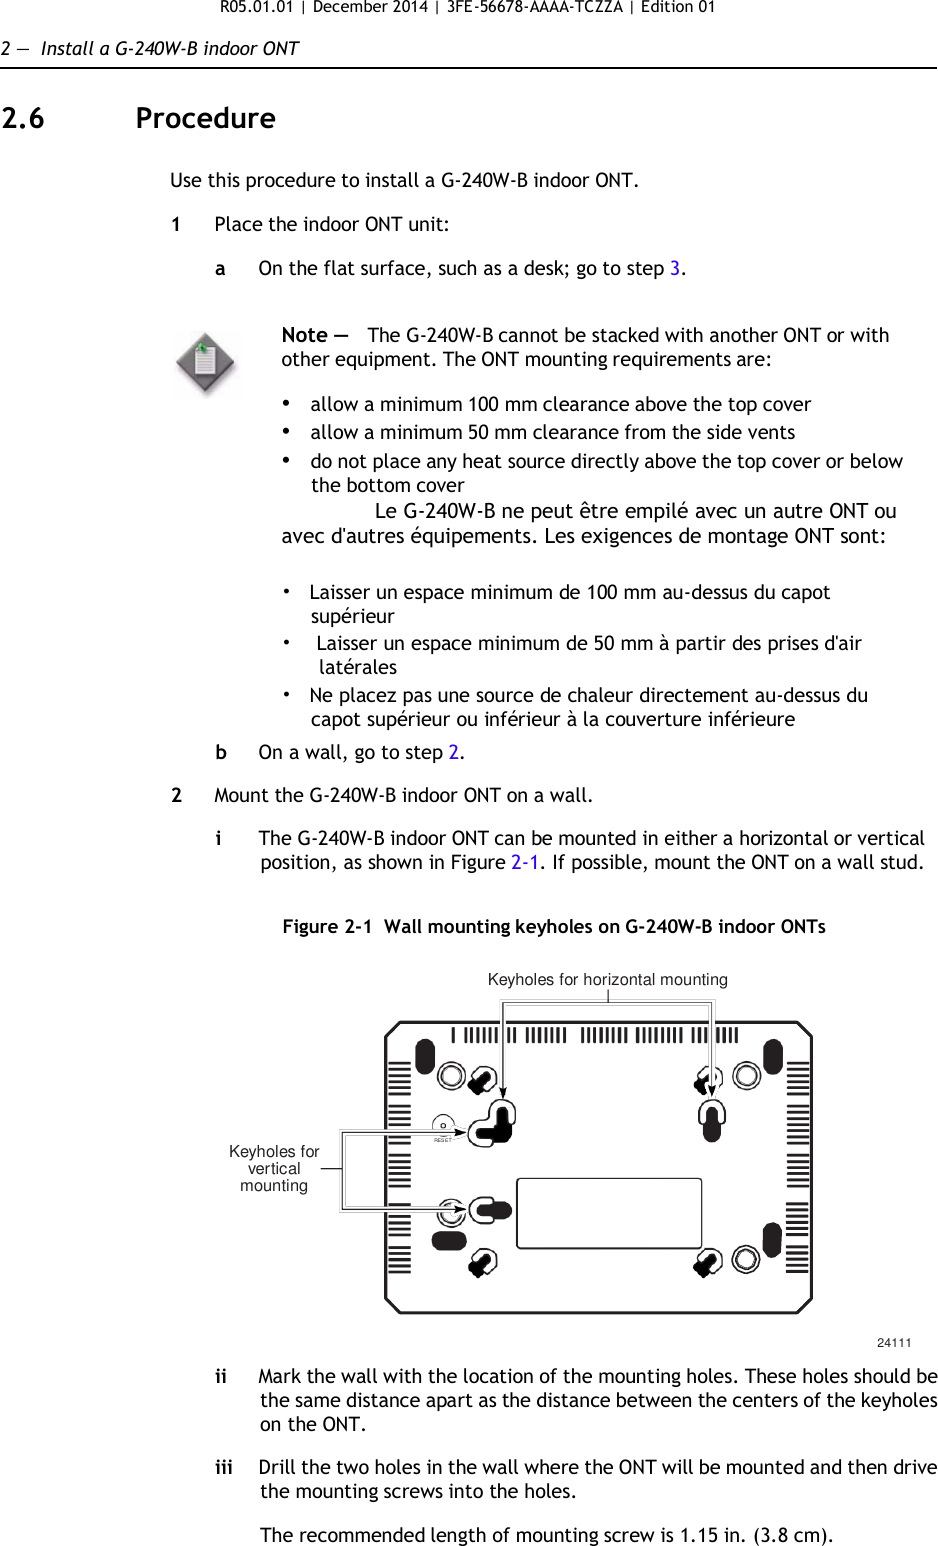 R05.01.01 | December 2014 | 3FE-56678-AAAA-TCZZA | Edition 01  2 —  Install a G-240W-B indoor ONT   2.6  Procedure   Use this procedure to install a G-240W-B indoor ONT.  1  Place the indoor ONT unit:  a  On the flat surface, such as a desk; go to step 3.   Note —   The G-240W-B cannot be stacked with another ONT or with other equipment. The ONT mounting requirements are:  • allow a minimum 100 mm clearance above the top cover • allow a minimum 50 mm clearance from the side vents • do not place any heat source directly above the top cover or below the bottom cover Le G-240W-B ne peut être empilé avec un autre ONT ou avec d&apos;autres équipements. Les exigences de montage ONT sont:  •   Laisser un espace minimum de 100 mm au-dessus du capot supérieur •  Laisser un espace minimum de 50 mm à partir des prises d&apos;air latérales •   Ne placez pas une source de chaleur directement au-dessus du capot supérieur ou inférieur à la couverture inférieure  b  On a wall, go to step 2.  2  Mount the G-240W-B indoor ONT on a wall.  i  The G-240W-B indoor ONT can be mounted in either a horizontal or vertical position, as shown in Figure 2-1. If possible, mount the ONT on a wall stud.   Figure 2-1  Wall mounting keyholes on G-240W-B indoor ONTs  Keyholes for horizontal mounting         Keyholes for vertical mounting RESET        24111  ii Mark the wall with the location of the mounting holes. These holes should be the same distance apart as the distance between the centers of the keyholes on the ONT.  iii Drill the two holes in the wall where the ONT will be mounted and then drive the mounting screws into the holes.  The recommended length of mounting screw is 1.15 in. (3.8 cm). 